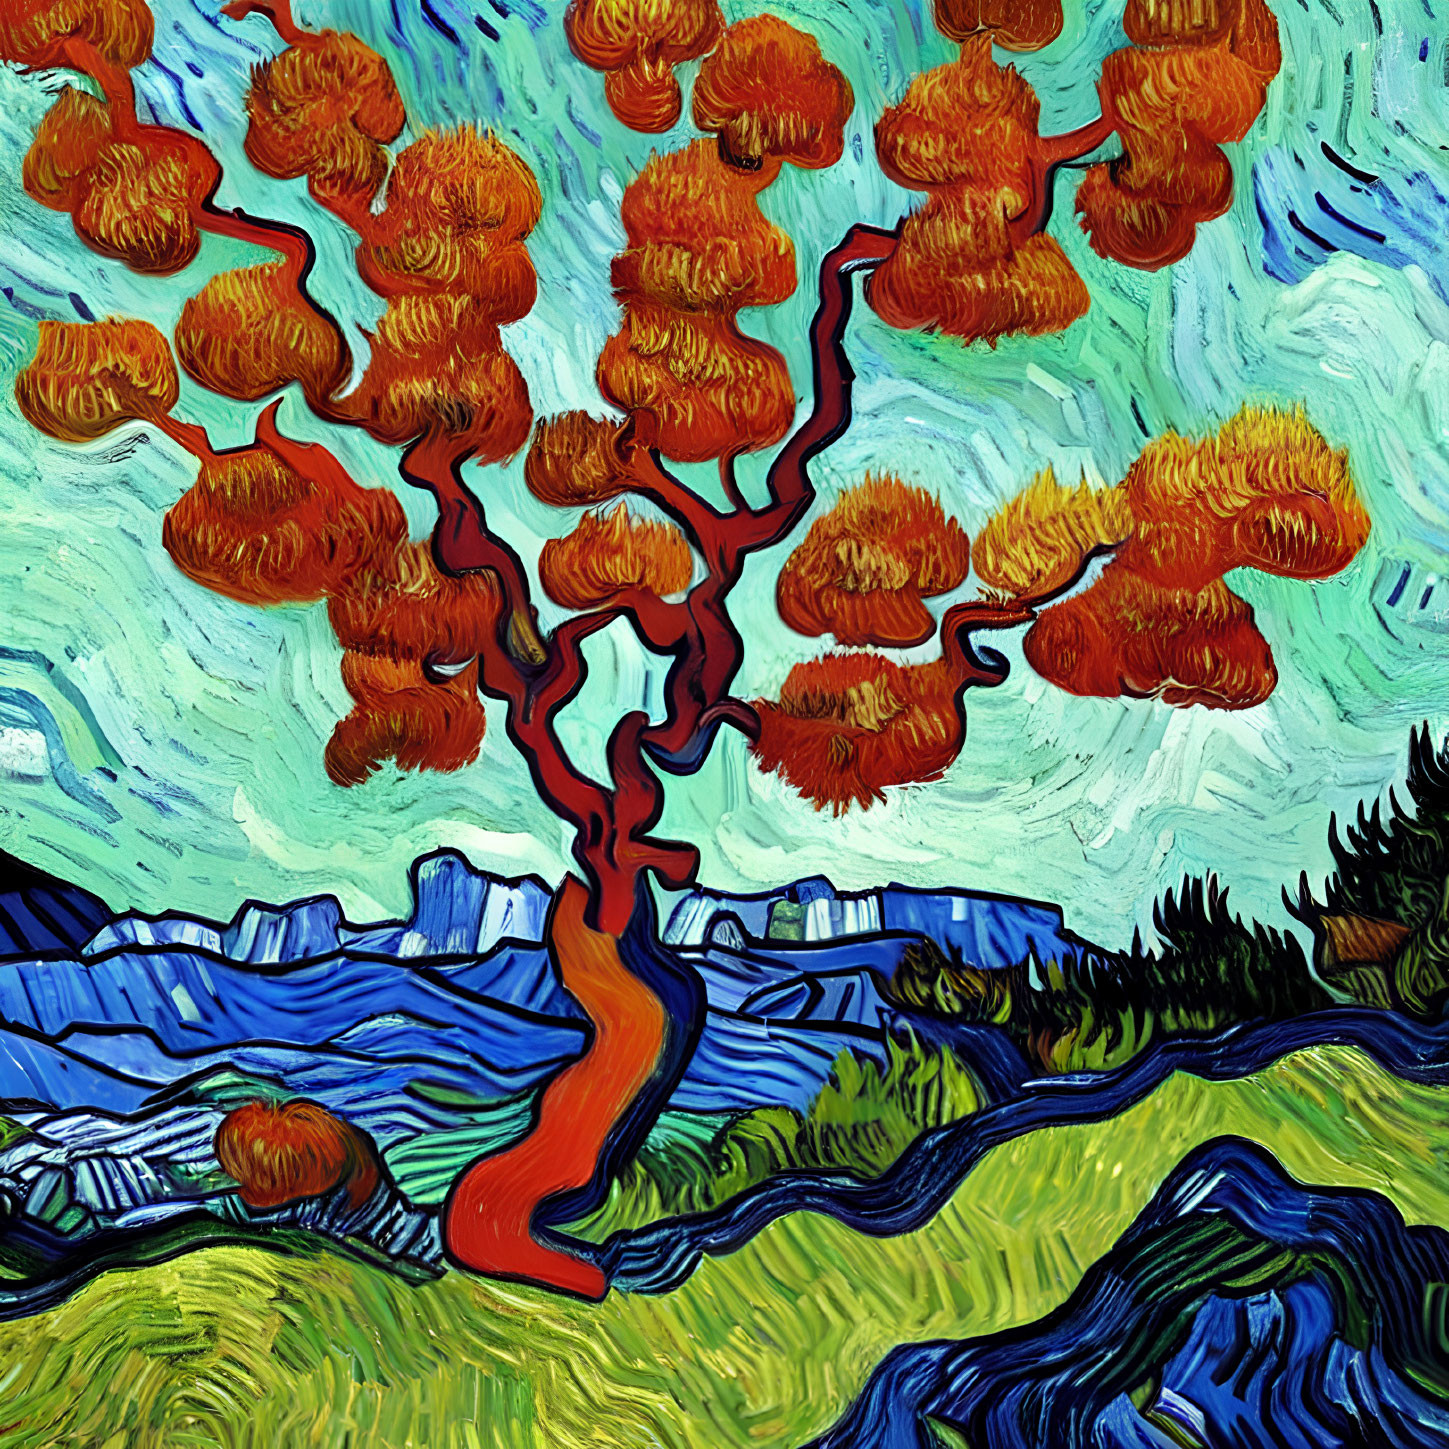 Colorful Van Gogh-style painting: swirling blue sky, red tree, orange foliage, green hills